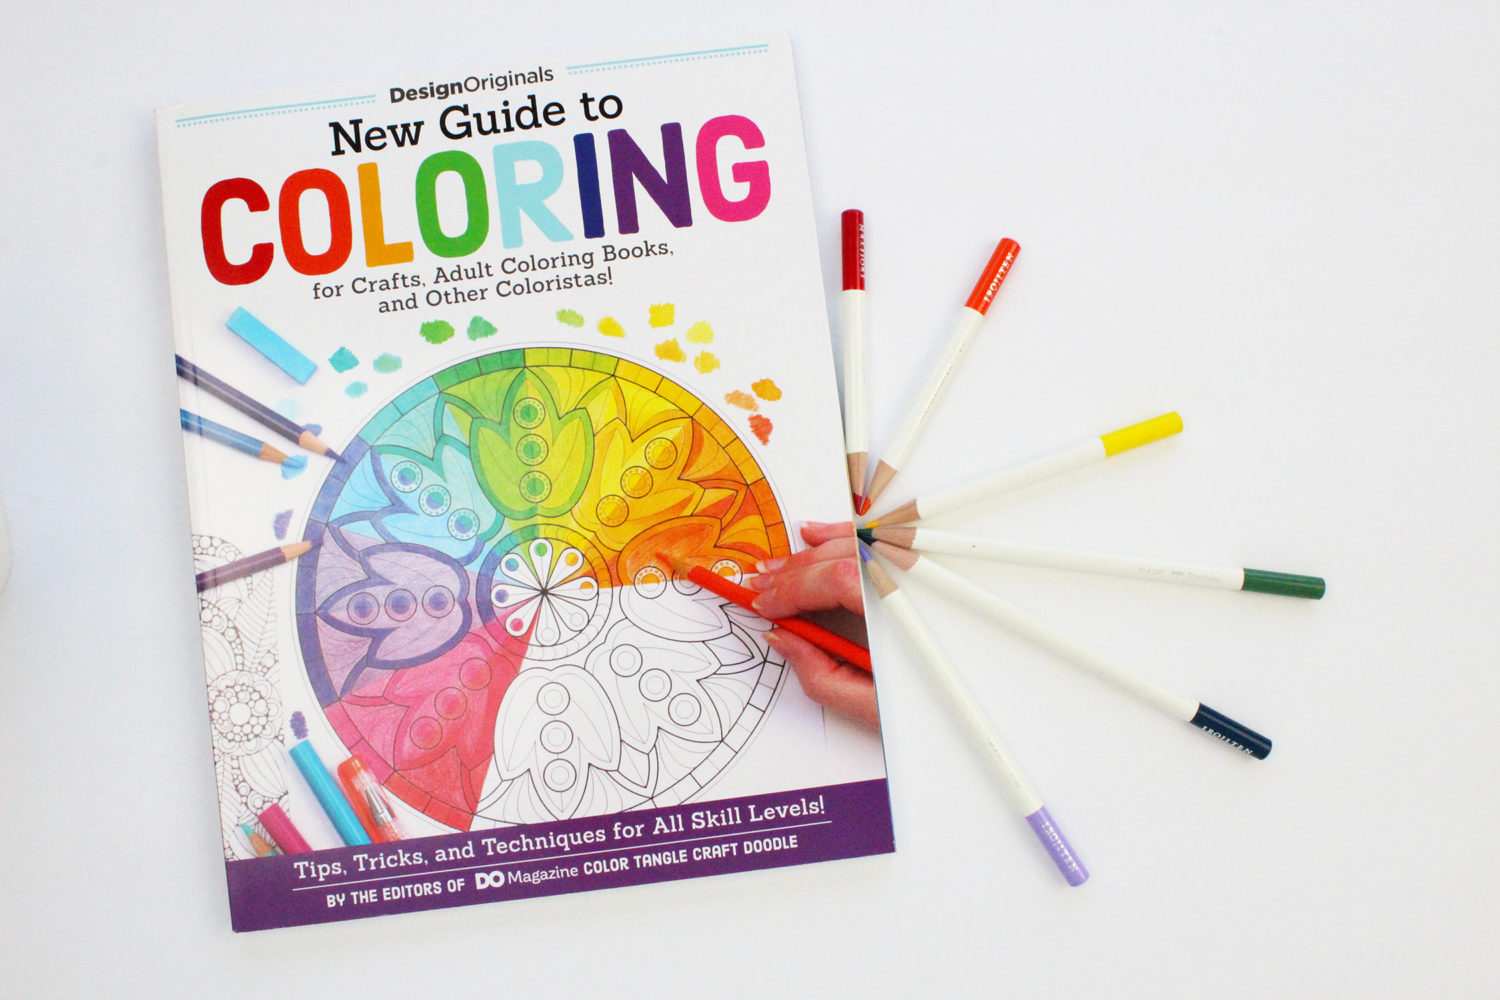 Crafty Colors: Techniques And Instructions For Coloring Crafts on